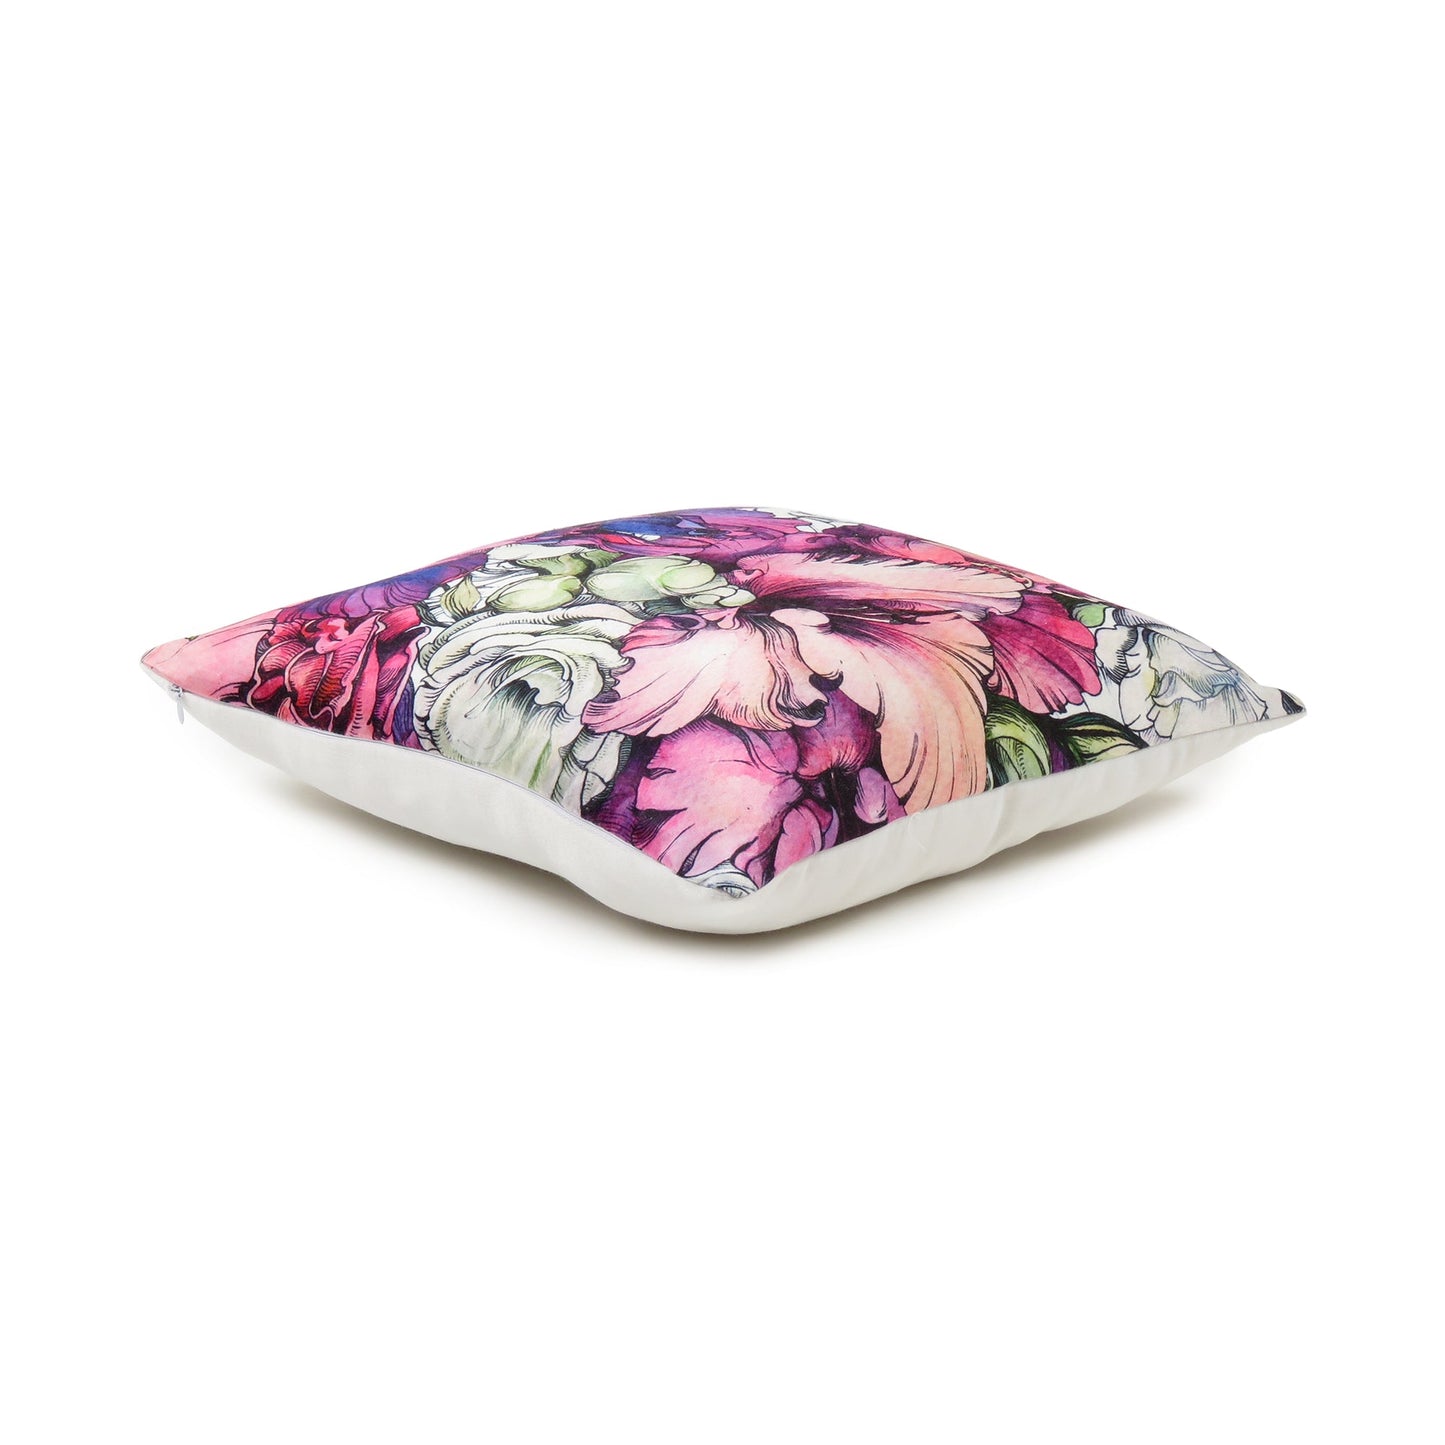 Multicolor Floral & Leaf Printed Cushion Cover in Set of 2